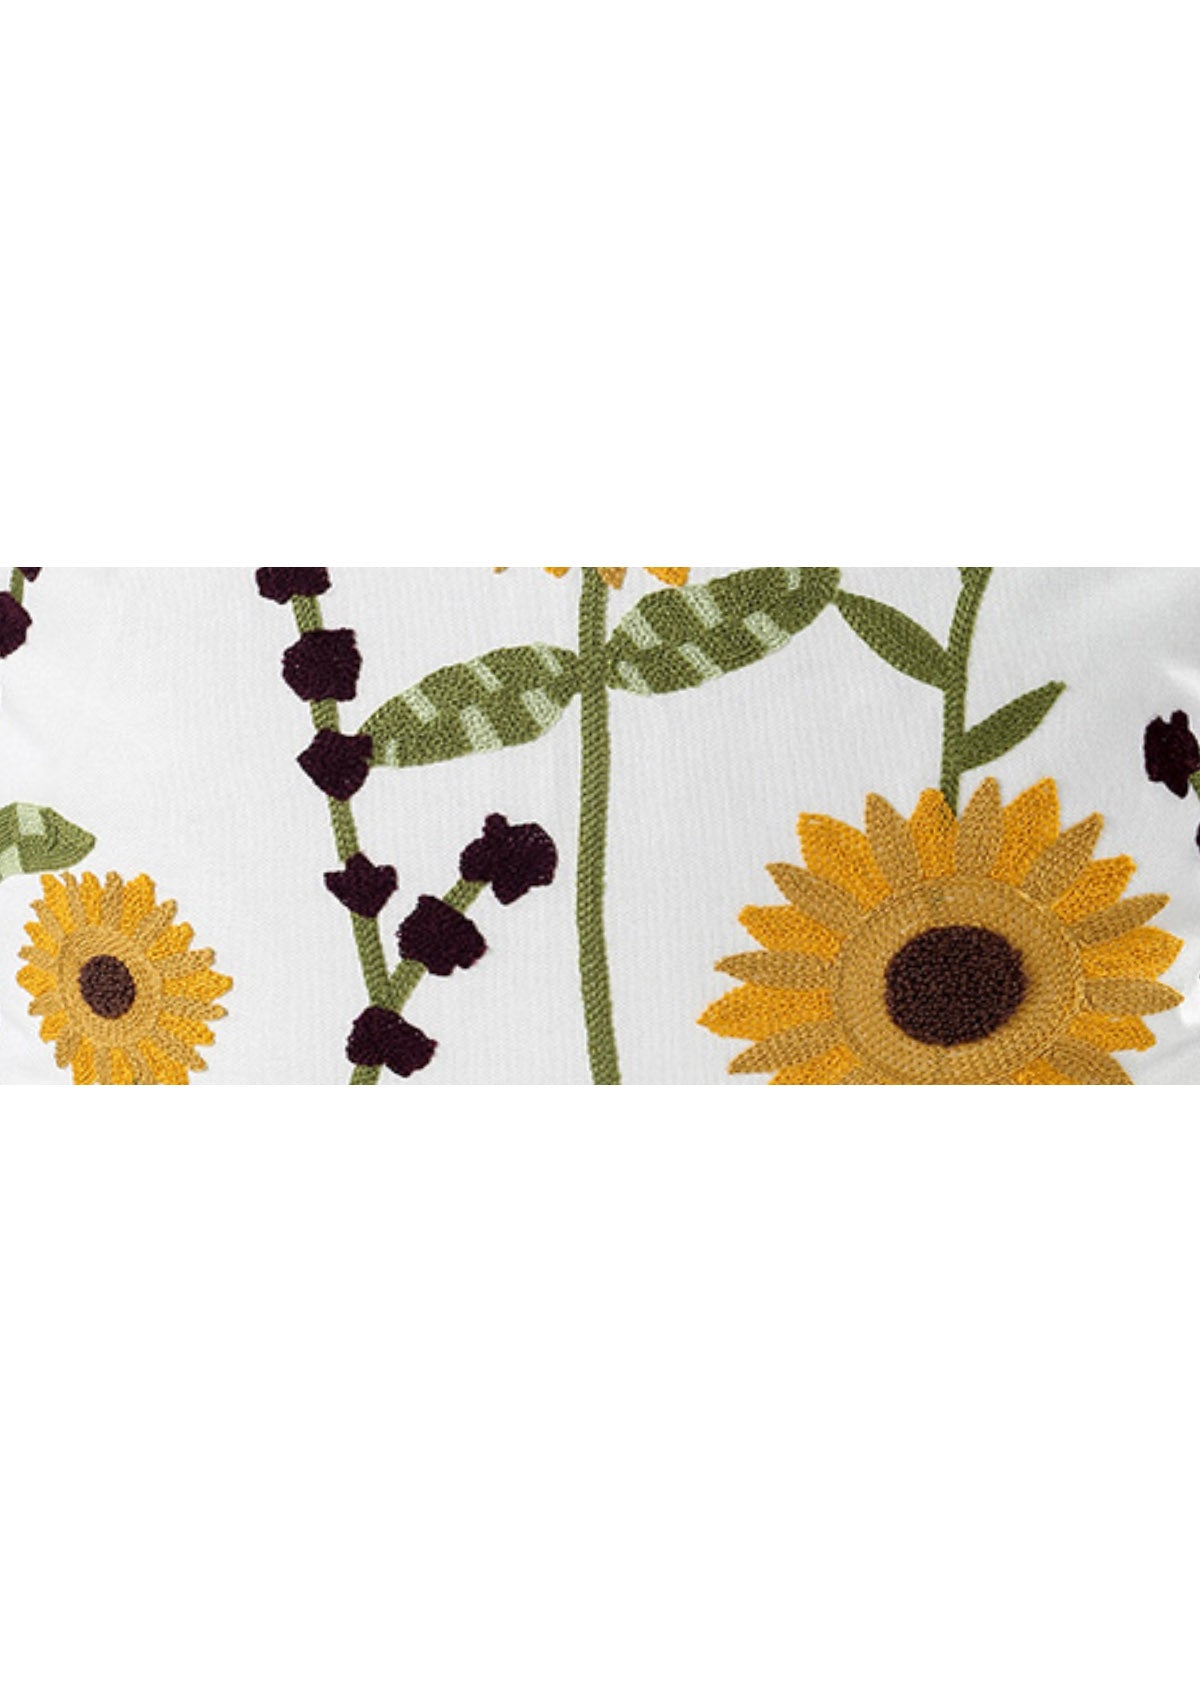 Sunflower patterned cushion cover featuring lifelike sunflowers, creating a joyful and inviting atmosphere